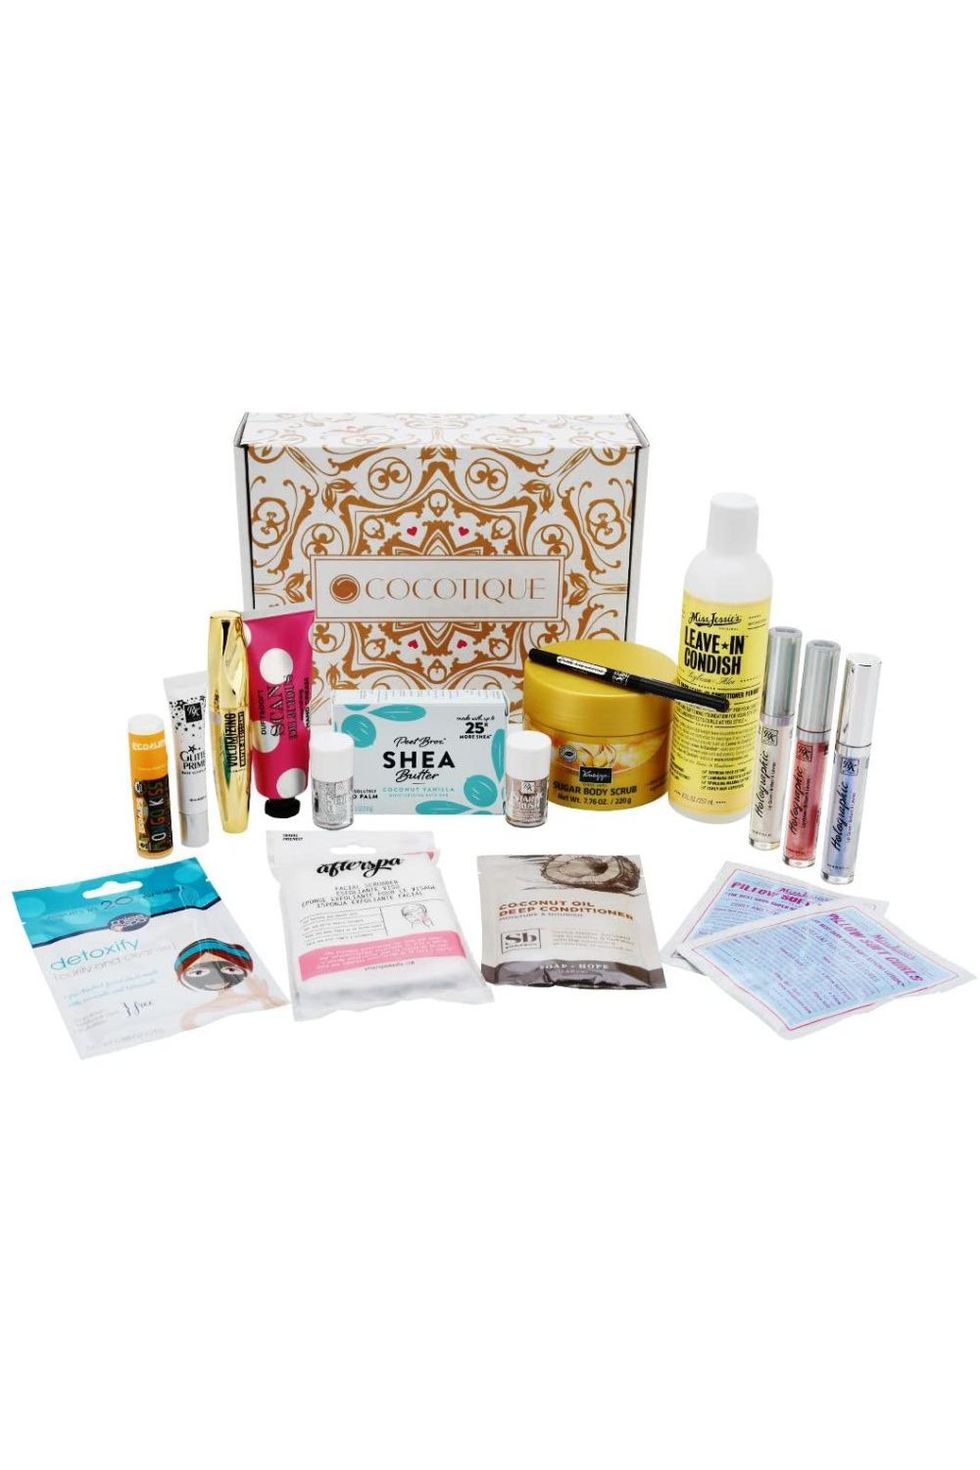 Beauty & Self-Care Subscription Box for Women of Color